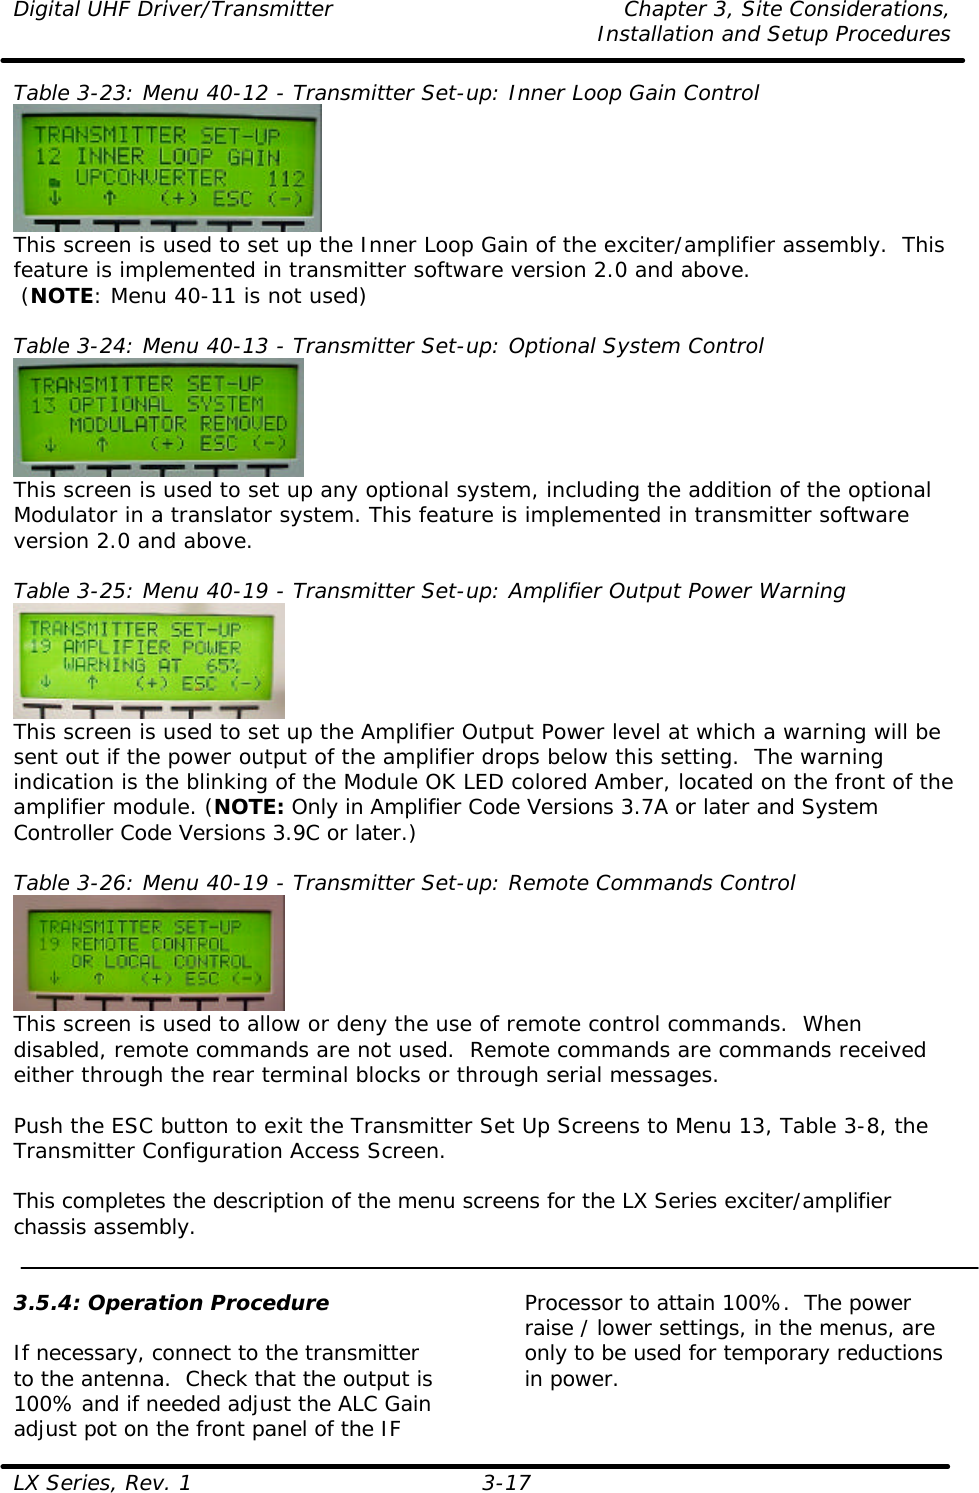 Digital UHF Driver/Transmitter Chapter 3, Site Considerations,   Installation and Setup Procedures  LX Series, Rev. 1 3-17 Table 3-23: Menu 40-12 - Transmitter Set-up: Inner Loop Gain Control   This screen is used to set up the Inner Loop Gain of the exciter/amplifier assembly.  This feature is implemented in transmitter software version 2.0 and above.  (NOTE: Menu 40-11 is not used)  Table 3-24: Menu 40-13 - Transmitter Set-up: Optional System Control  This screen is used to set up any optional system, including the addition of the optional Modulator in a translator system. This feature is implemented in transmitter software version 2.0 and above.  Table 3-25: Menu 40-19 - Transmitter Set-up: Amplifier Output Power Warning  This screen is used to set up the Amplifier Output Power level at which a warning will be sent out if the power output of the amplifier drops below this setting.  The warning indication is the blinking of the Module OK LED colored Amber, located on the front of the amplifier module. (NOTE: Only in Amplifier Code Versions 3.7A or later and System Controller Code Versions 3.9C or later.)  Table 3-26: Menu 40-19 - Transmitter Set-up: Remote Commands Control  This screen is used to allow or deny the use of remote control commands.  When disabled, remote commands are not used.  Remote commands are commands received either through the rear terminal blocks or through serial messages.  Push the ESC button to exit the Transmitter Set Up Screens to Menu 13, Table 3-8, the Transmitter Configuration Access Screen.  This completes the description of the menu screens for the LX Series exciter/amplifier chassis assembly.   3.5.4: Operation Procedure  If necessary, connect to the transmitter to the antenna.  Check that the output is 100% and if needed adjust the ALC Gain adjust pot on the front panel of the IF Processor to attain 100%.  The power raise / lower settings, in the menus, are only to be used for temporary reductions in power.  